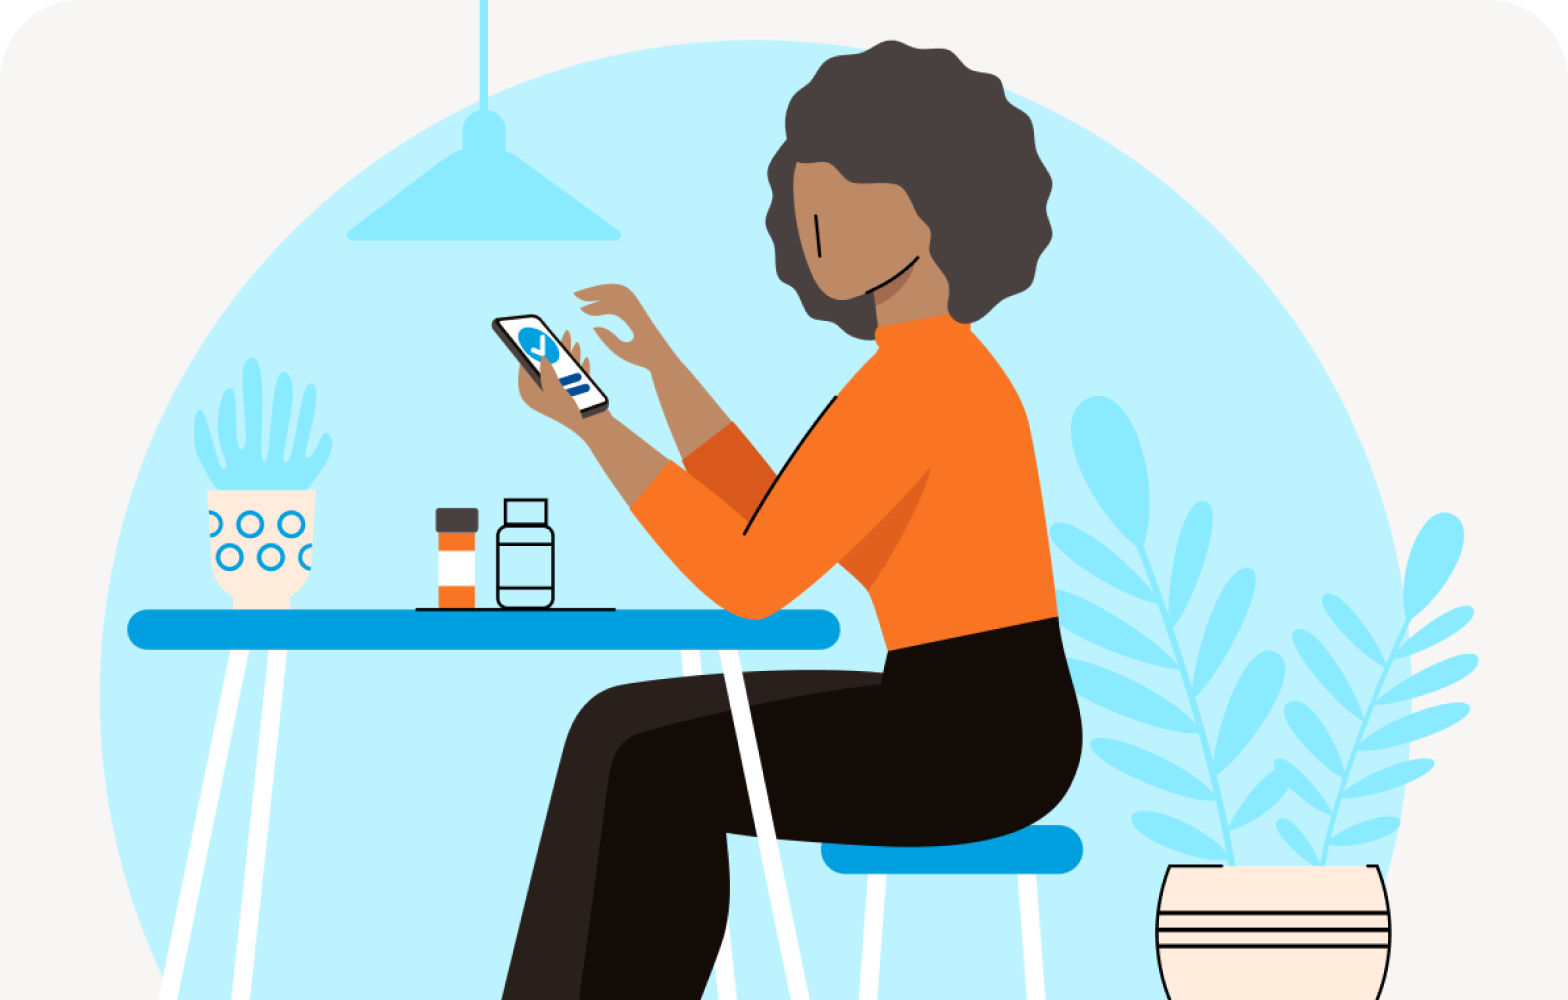 Illustrated image of a woman sitting at a table looking at a mobile phone